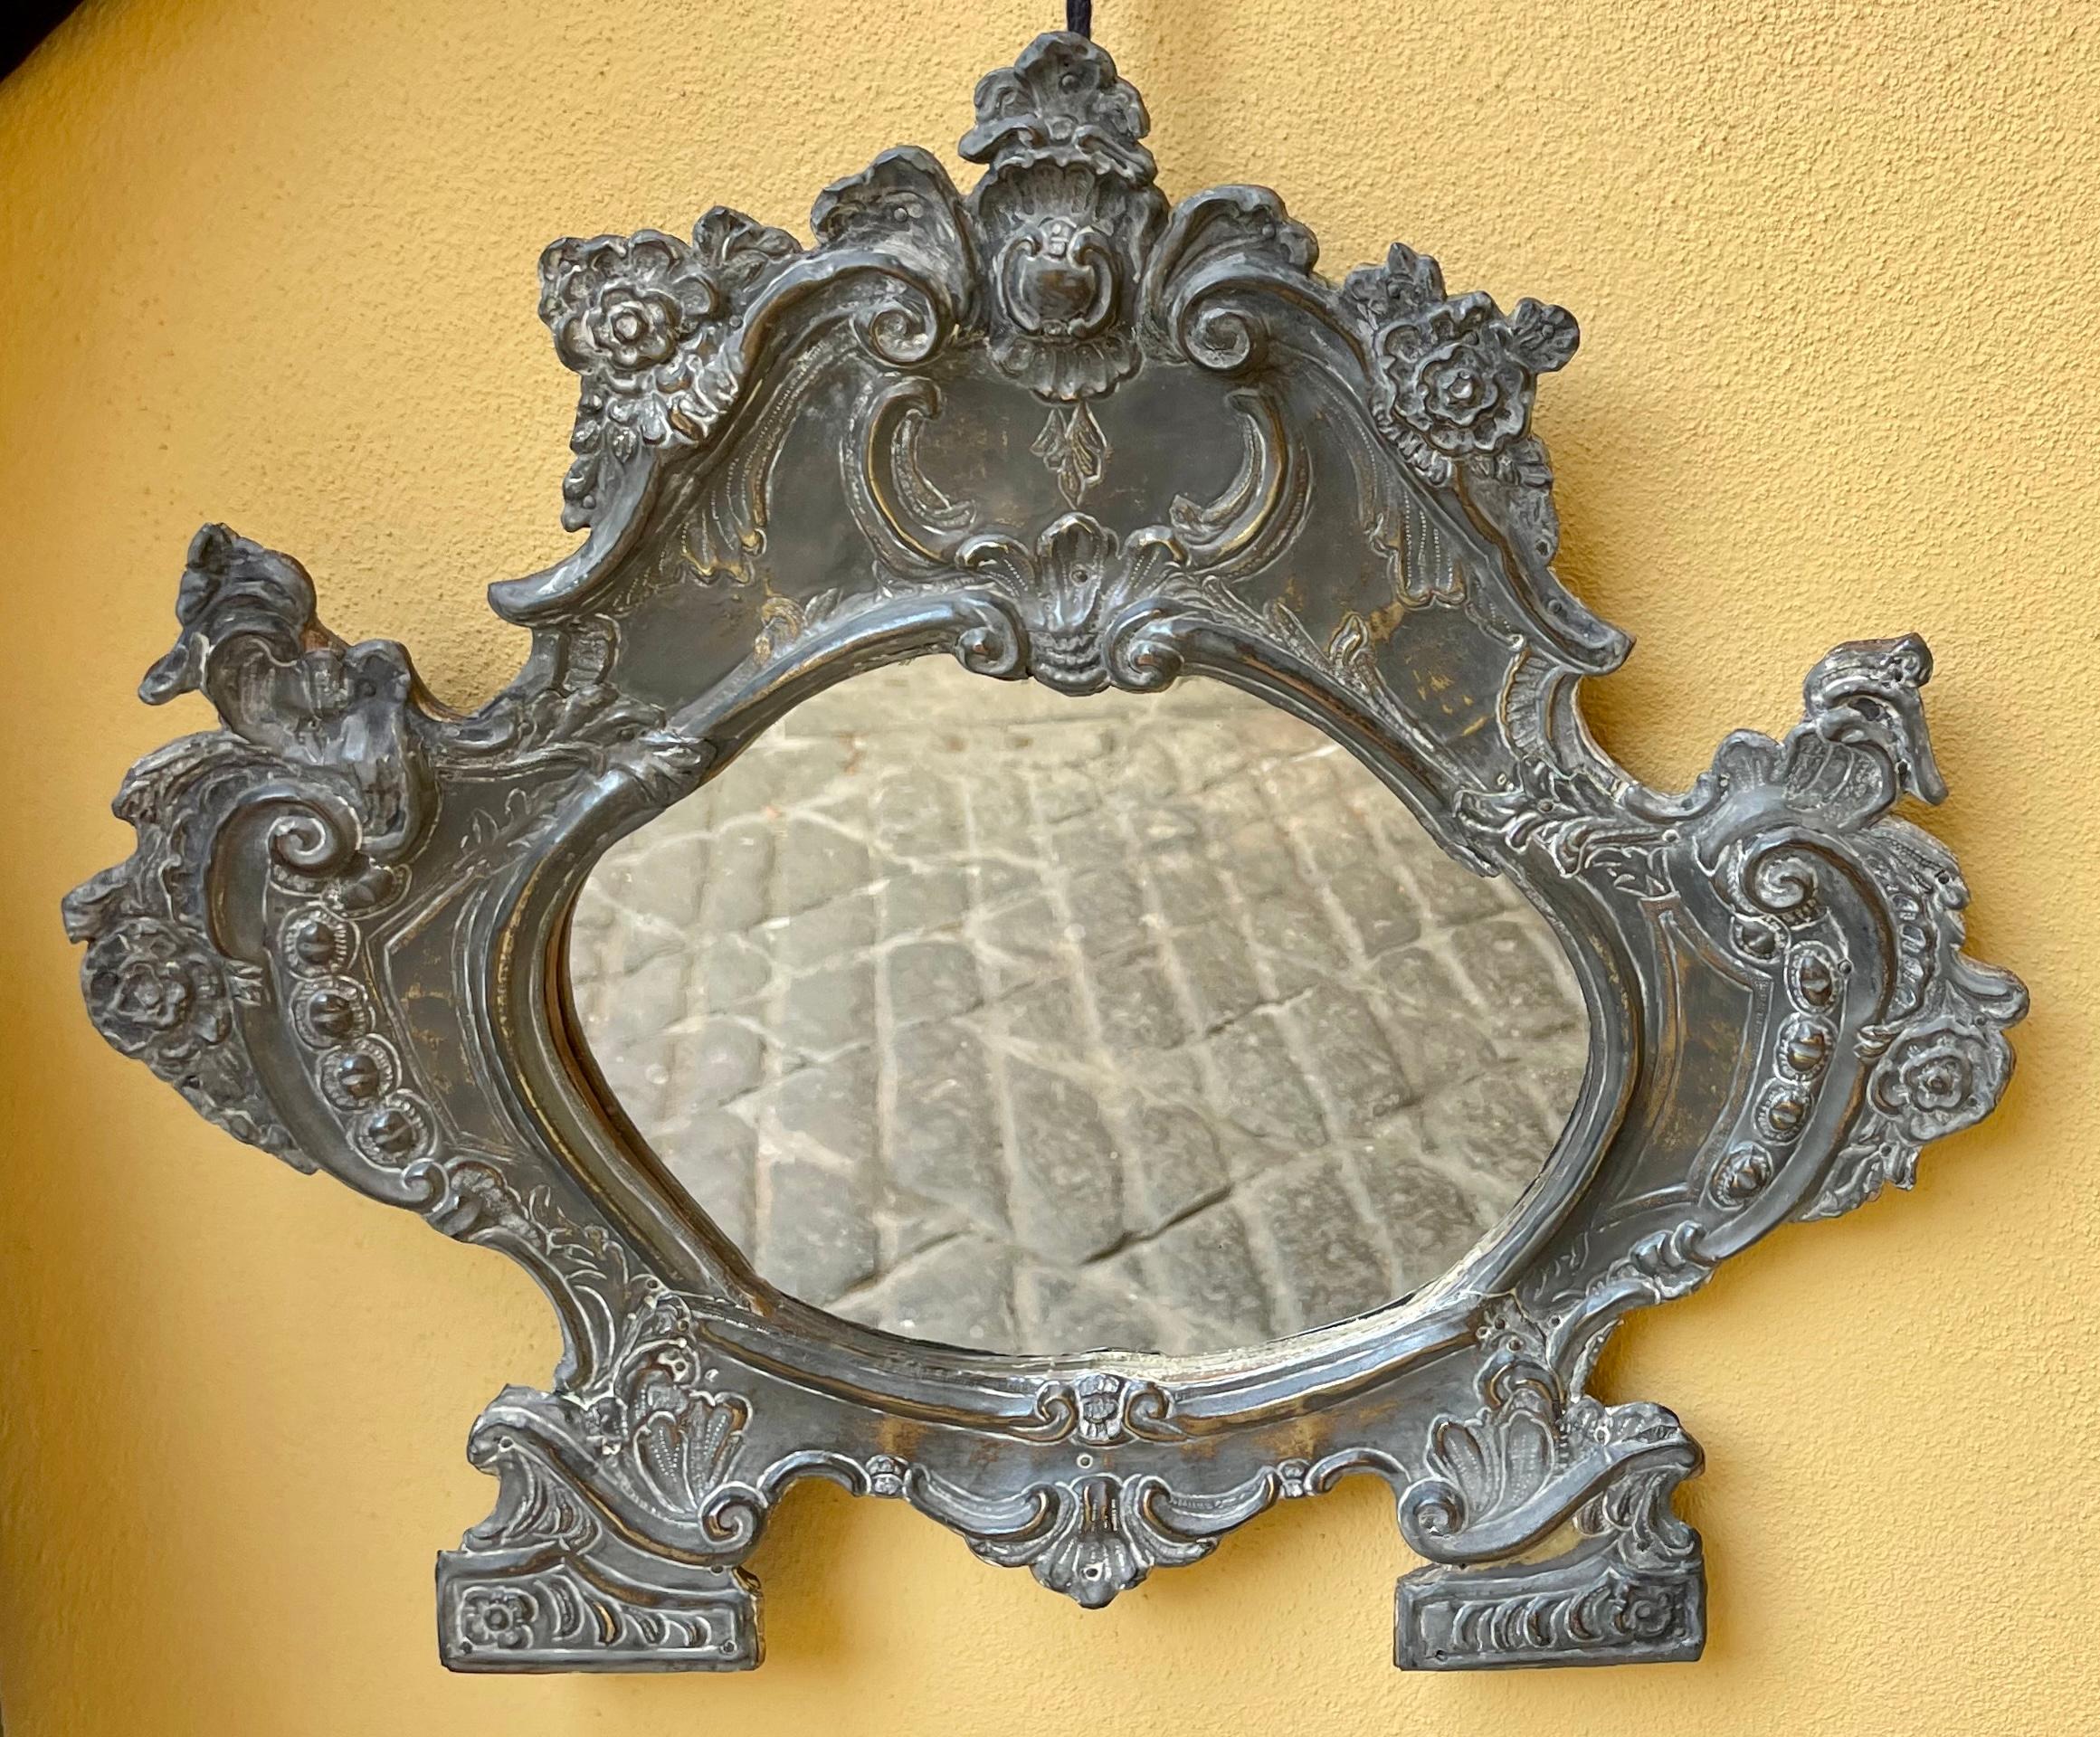 Roman Baroque metal mirror. Patinated brass baroque cartouche form mirror. Mirror replaced. Italy, c. 1700

Approximate dimensions: 19.25